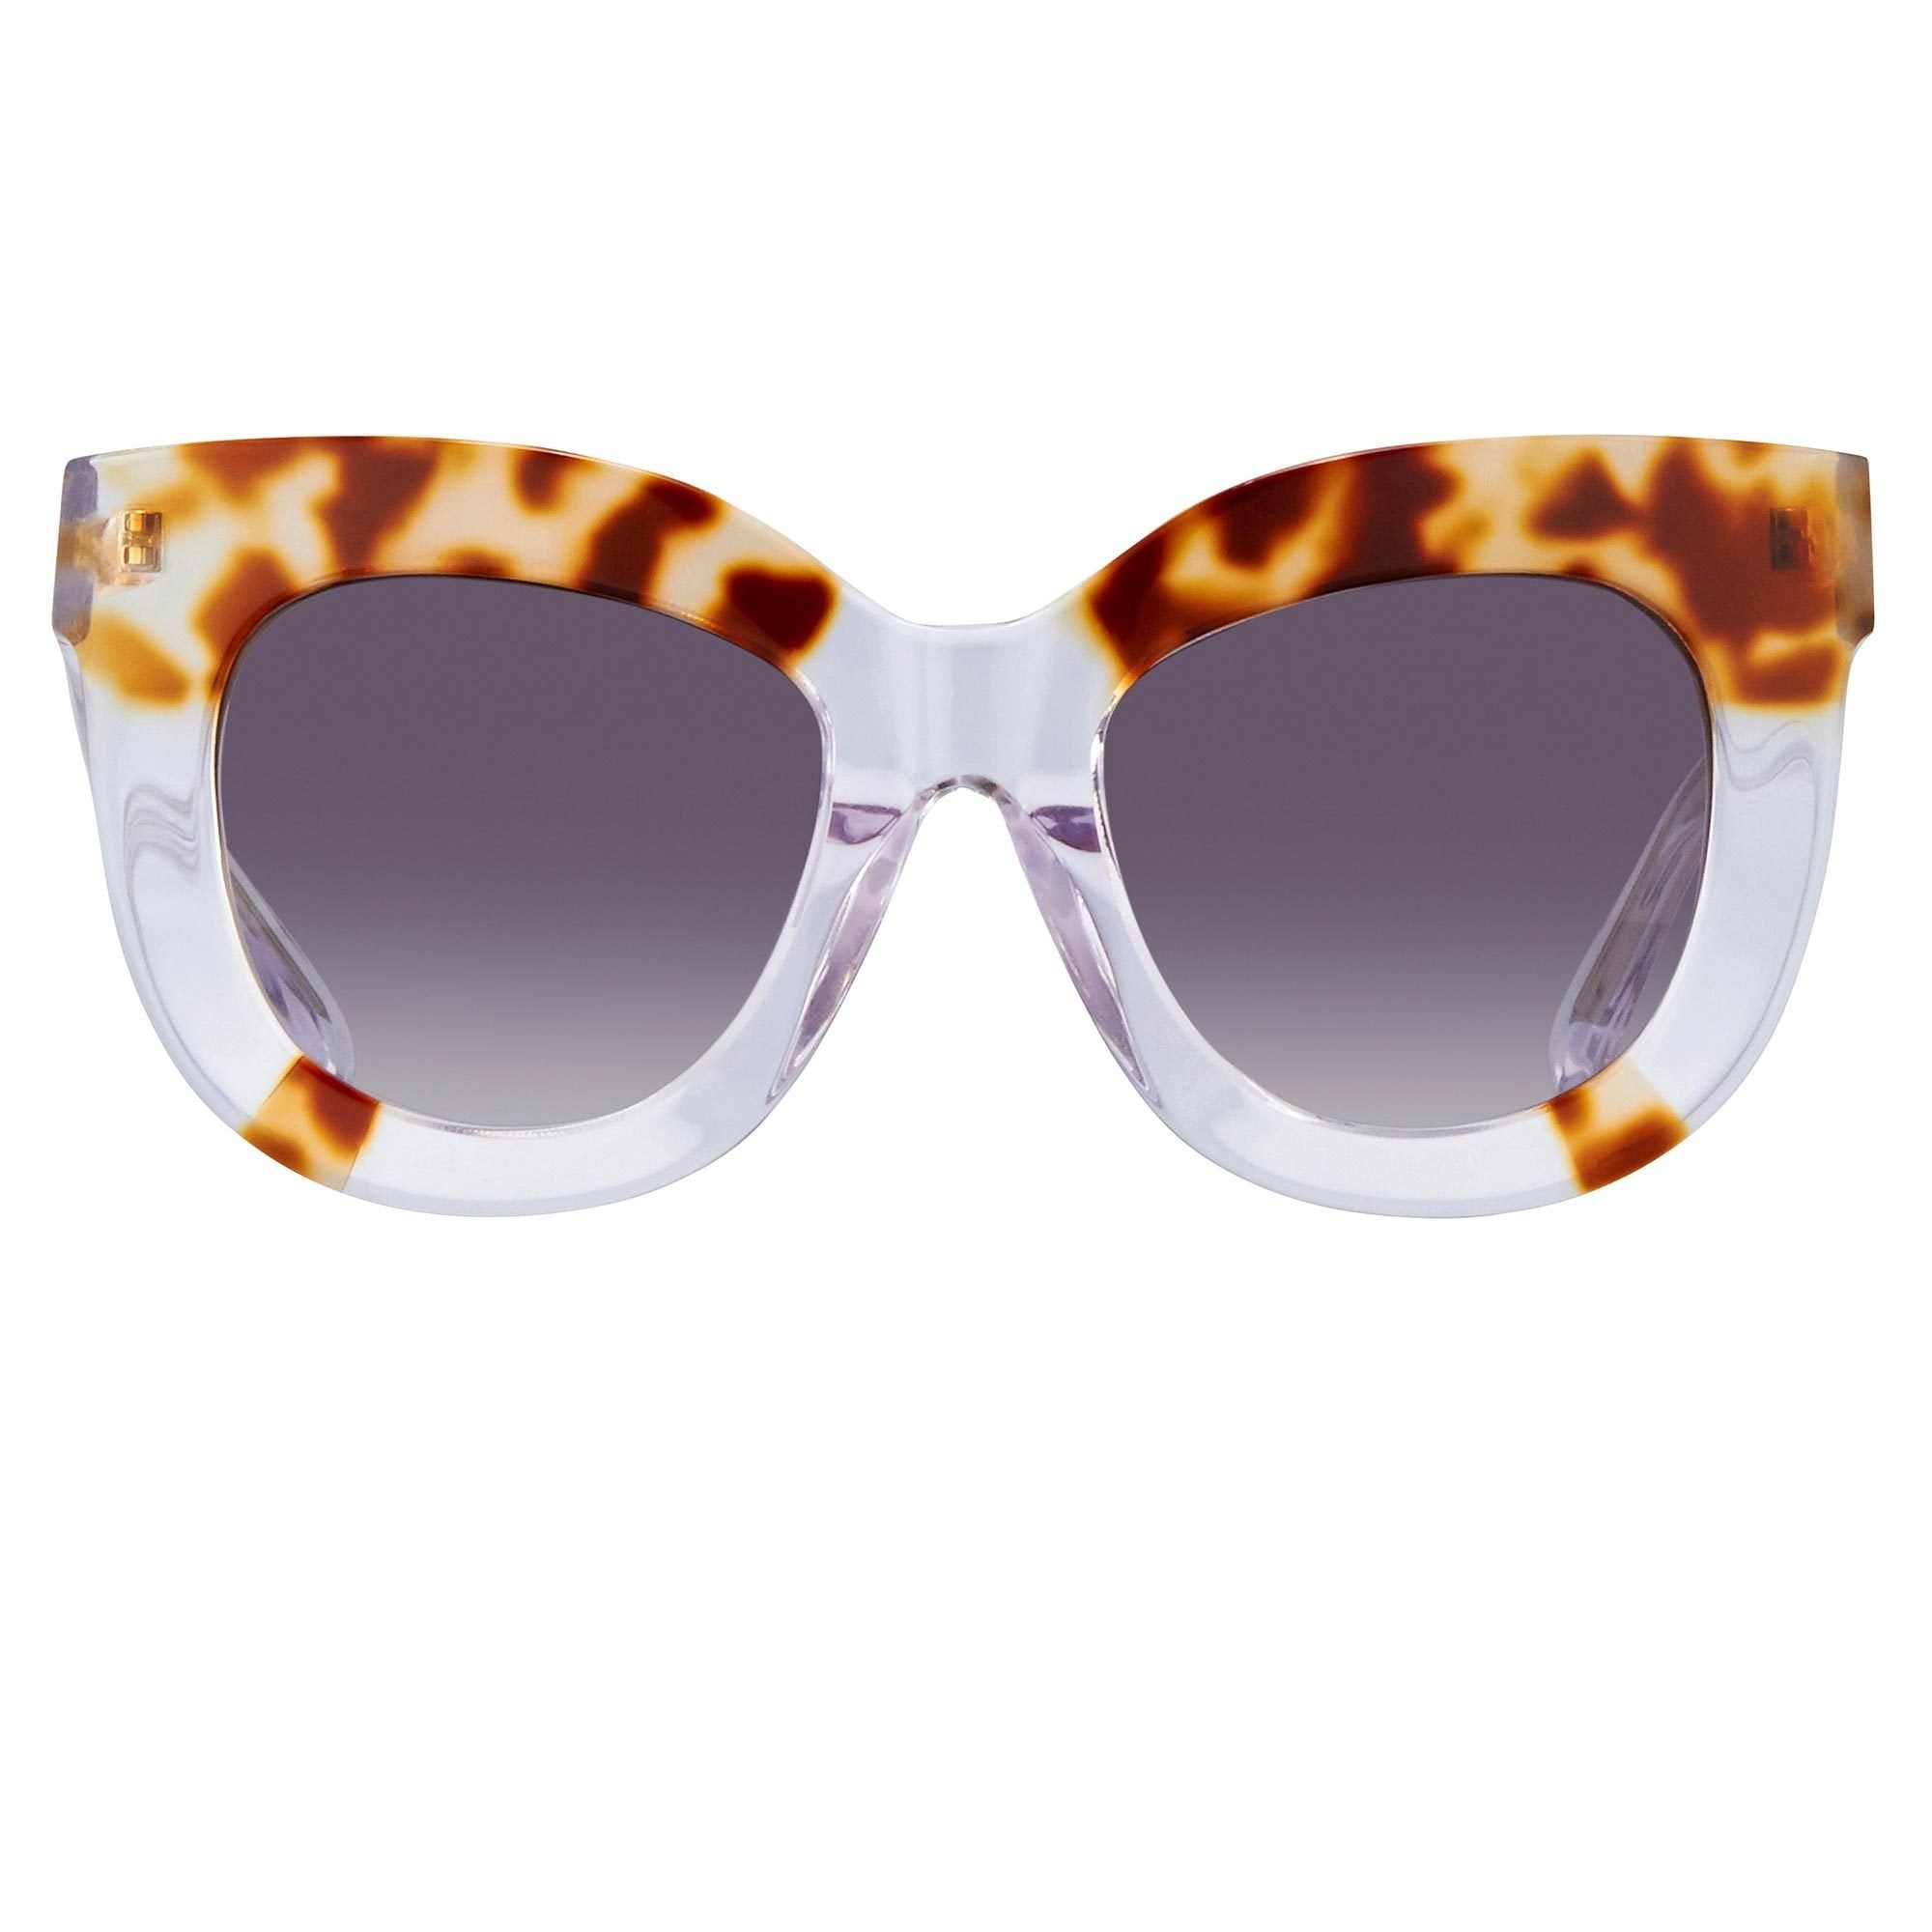 Erdem Women Sunglasses Oversized Amber Tortoise Shell Clear with Grey Graduated Lenses EDM20C3SUN - Watches & Crystals